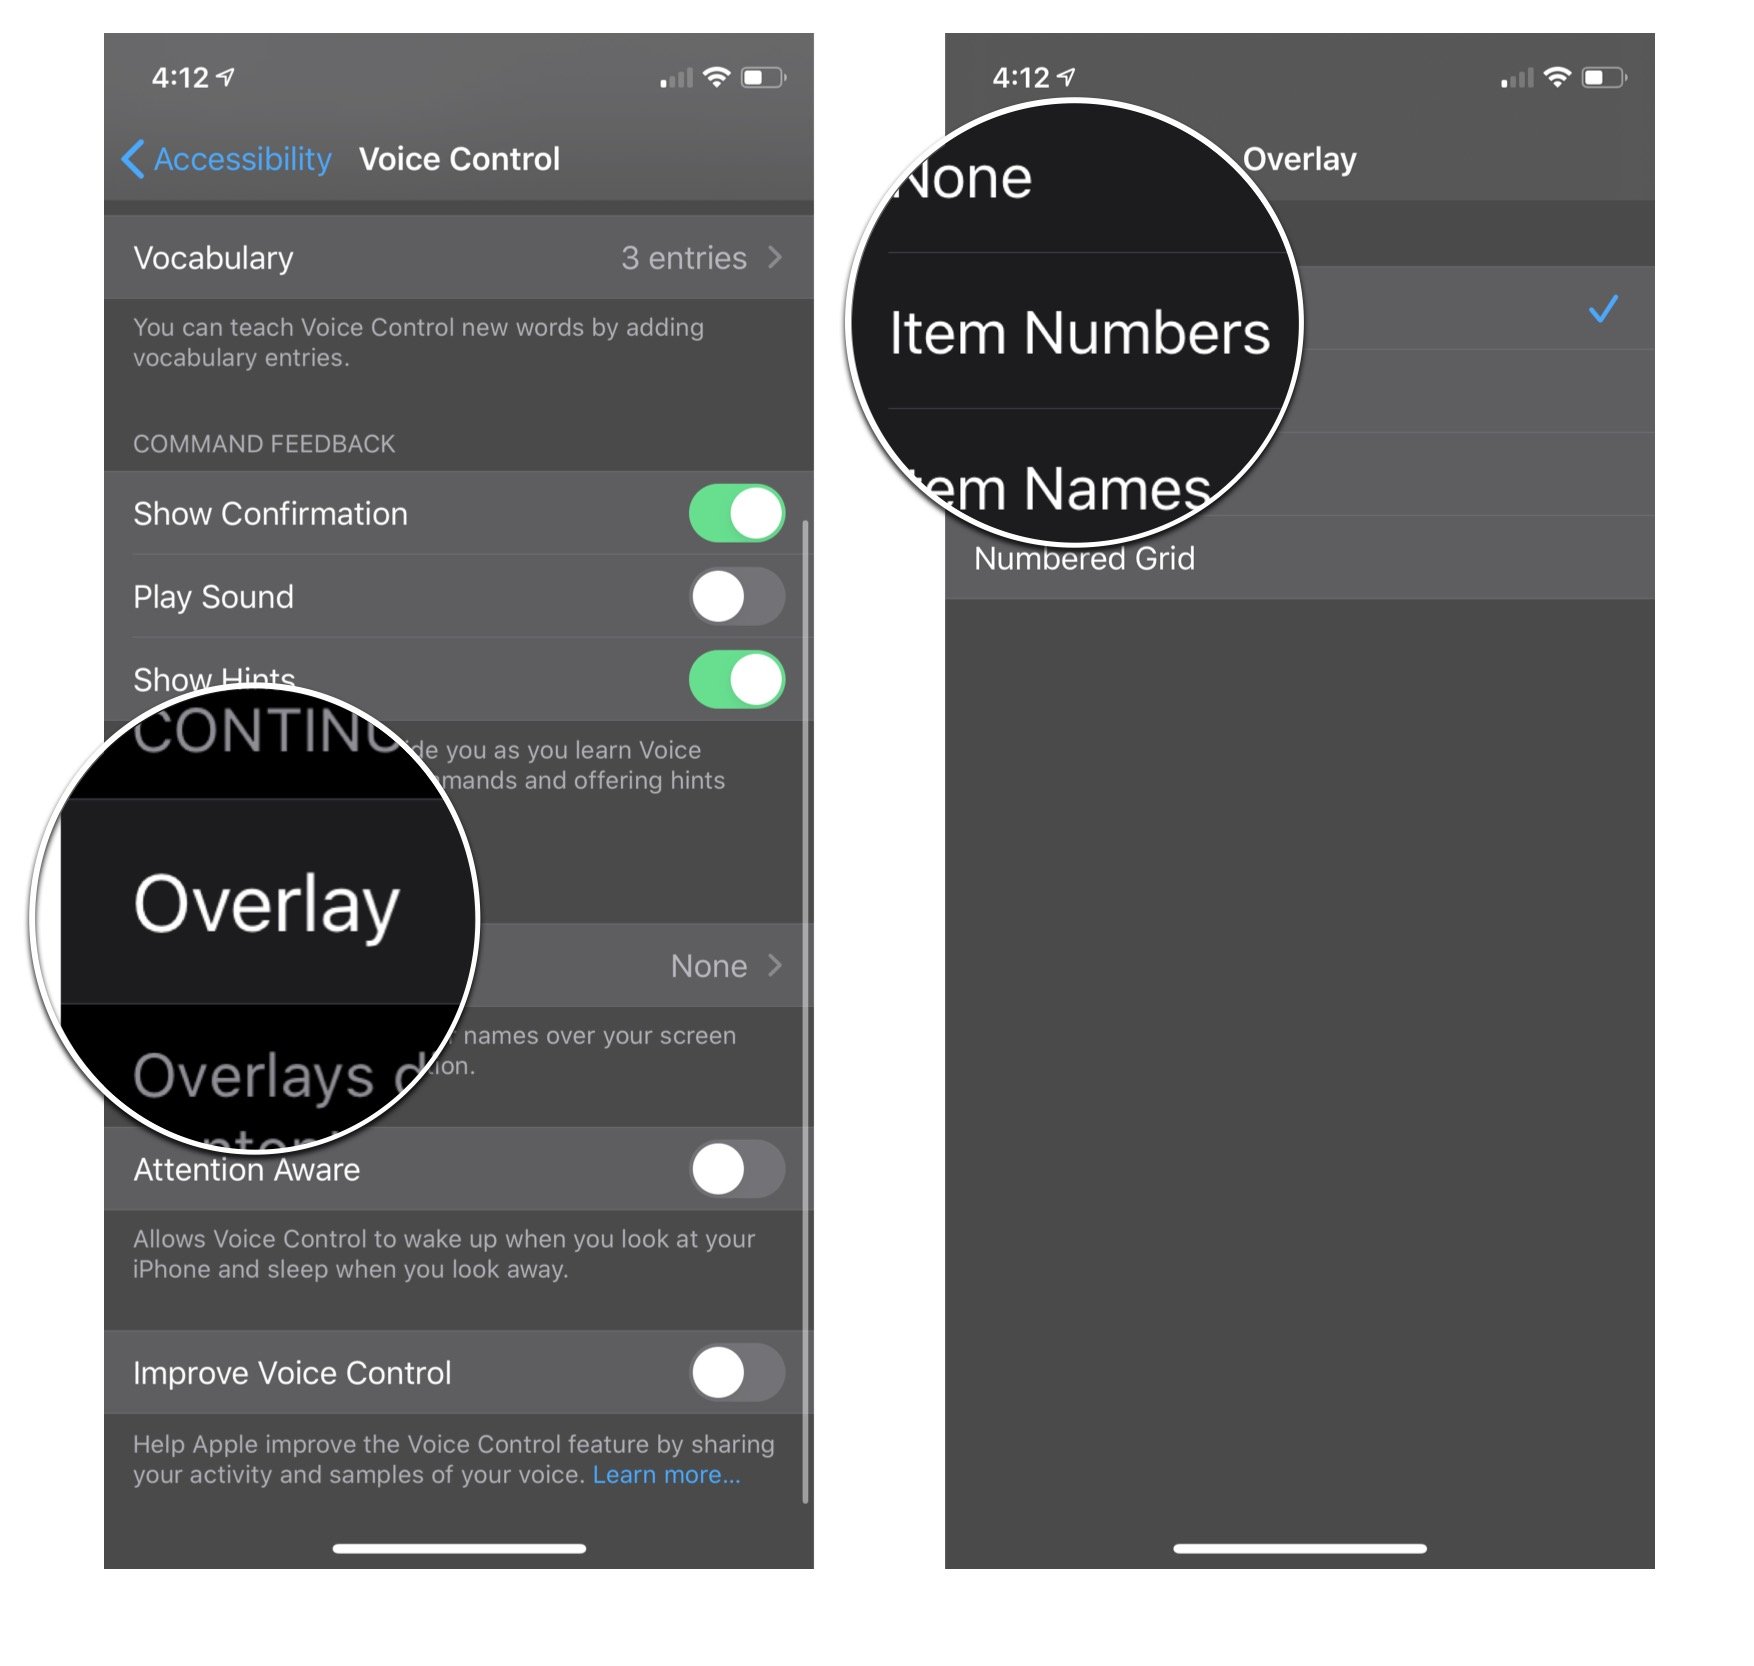 Item numbers overlay settings: Tap overlay and then tap item numbers